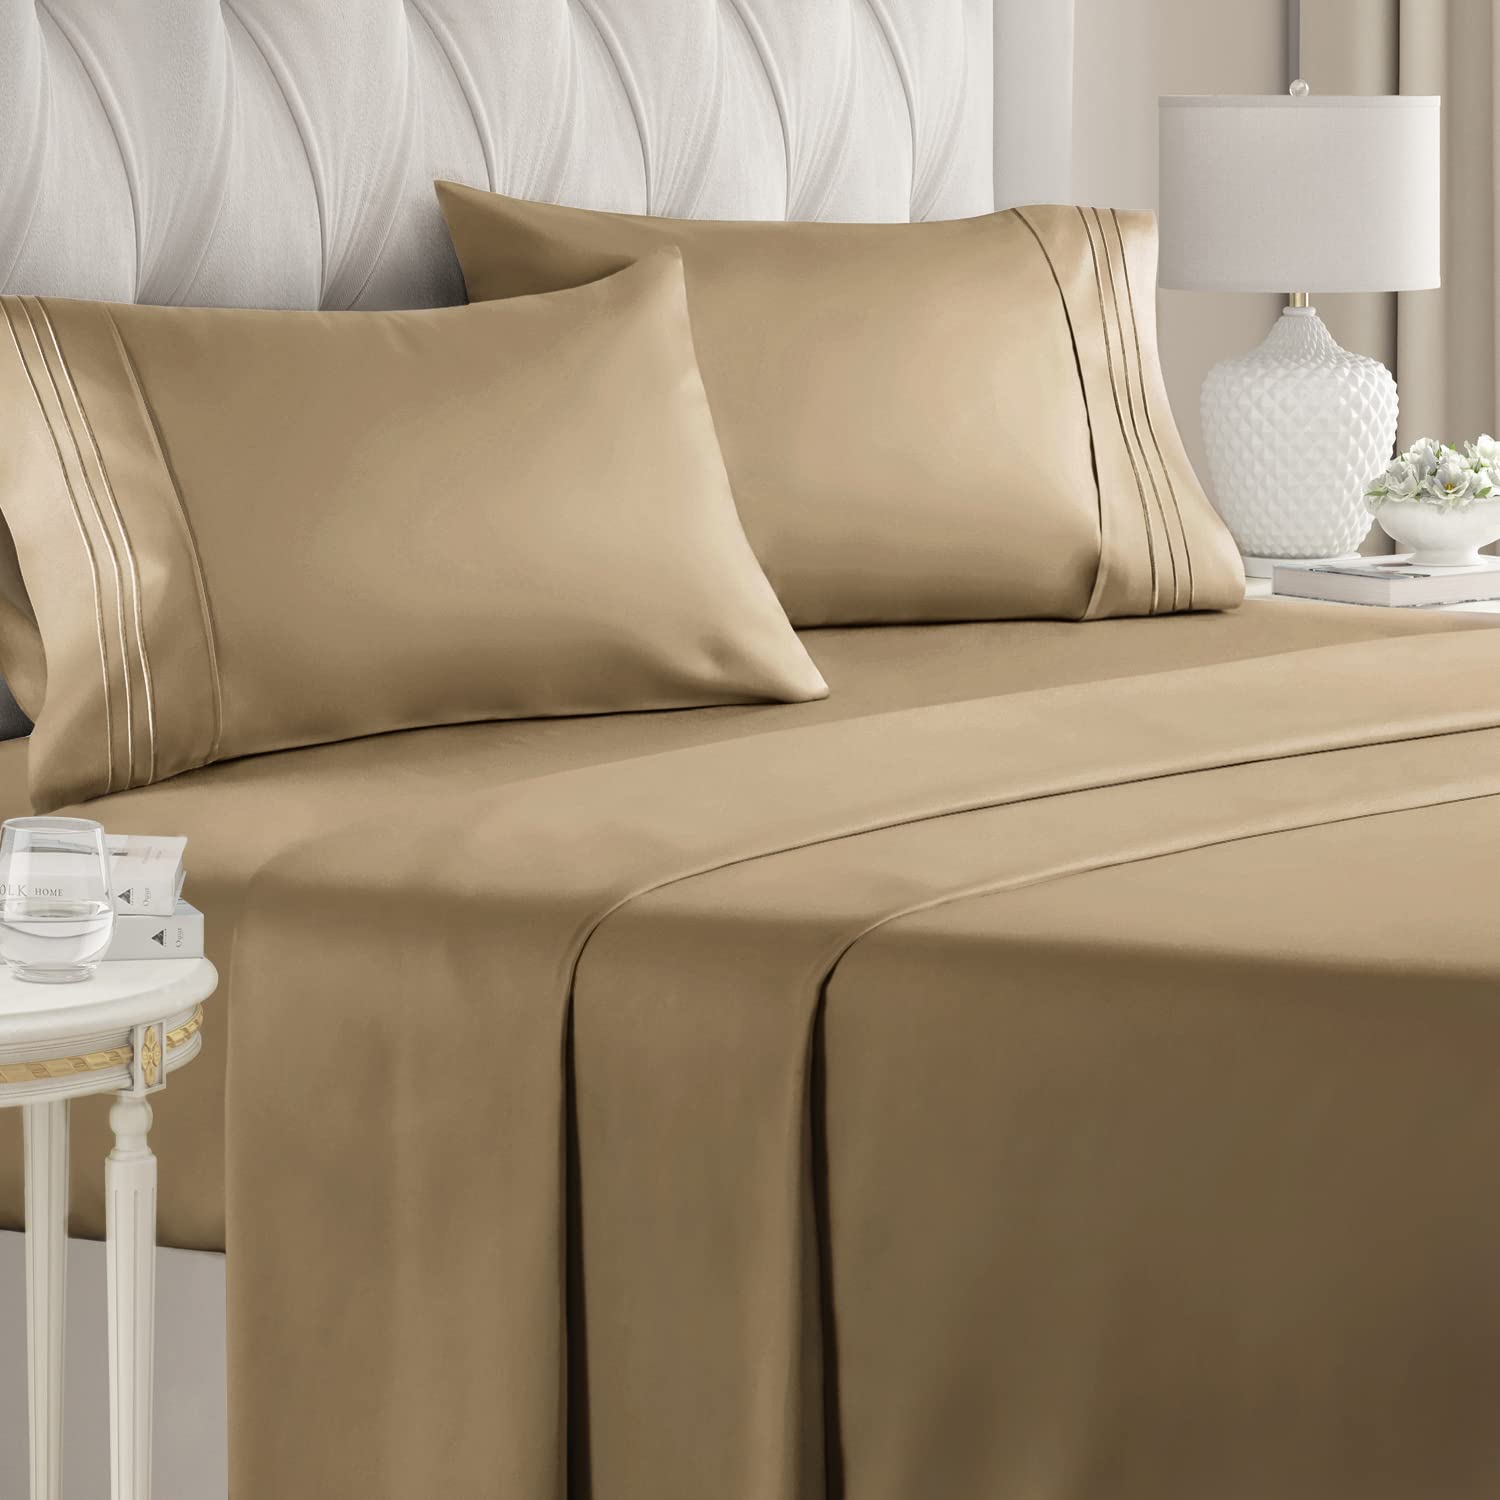 Book Cover Queen Size Sheet Set - Breathable & Cooling Sheets - Hotel Luxury Bed Sheets - Extra Soft - Deep Pockets - Easy Fit - 4 Piece Set - Wrinkle Free - Comfy – Beige Tan Bed Sheets - Queens Sheets – 4 PC 13 - Beige Queen